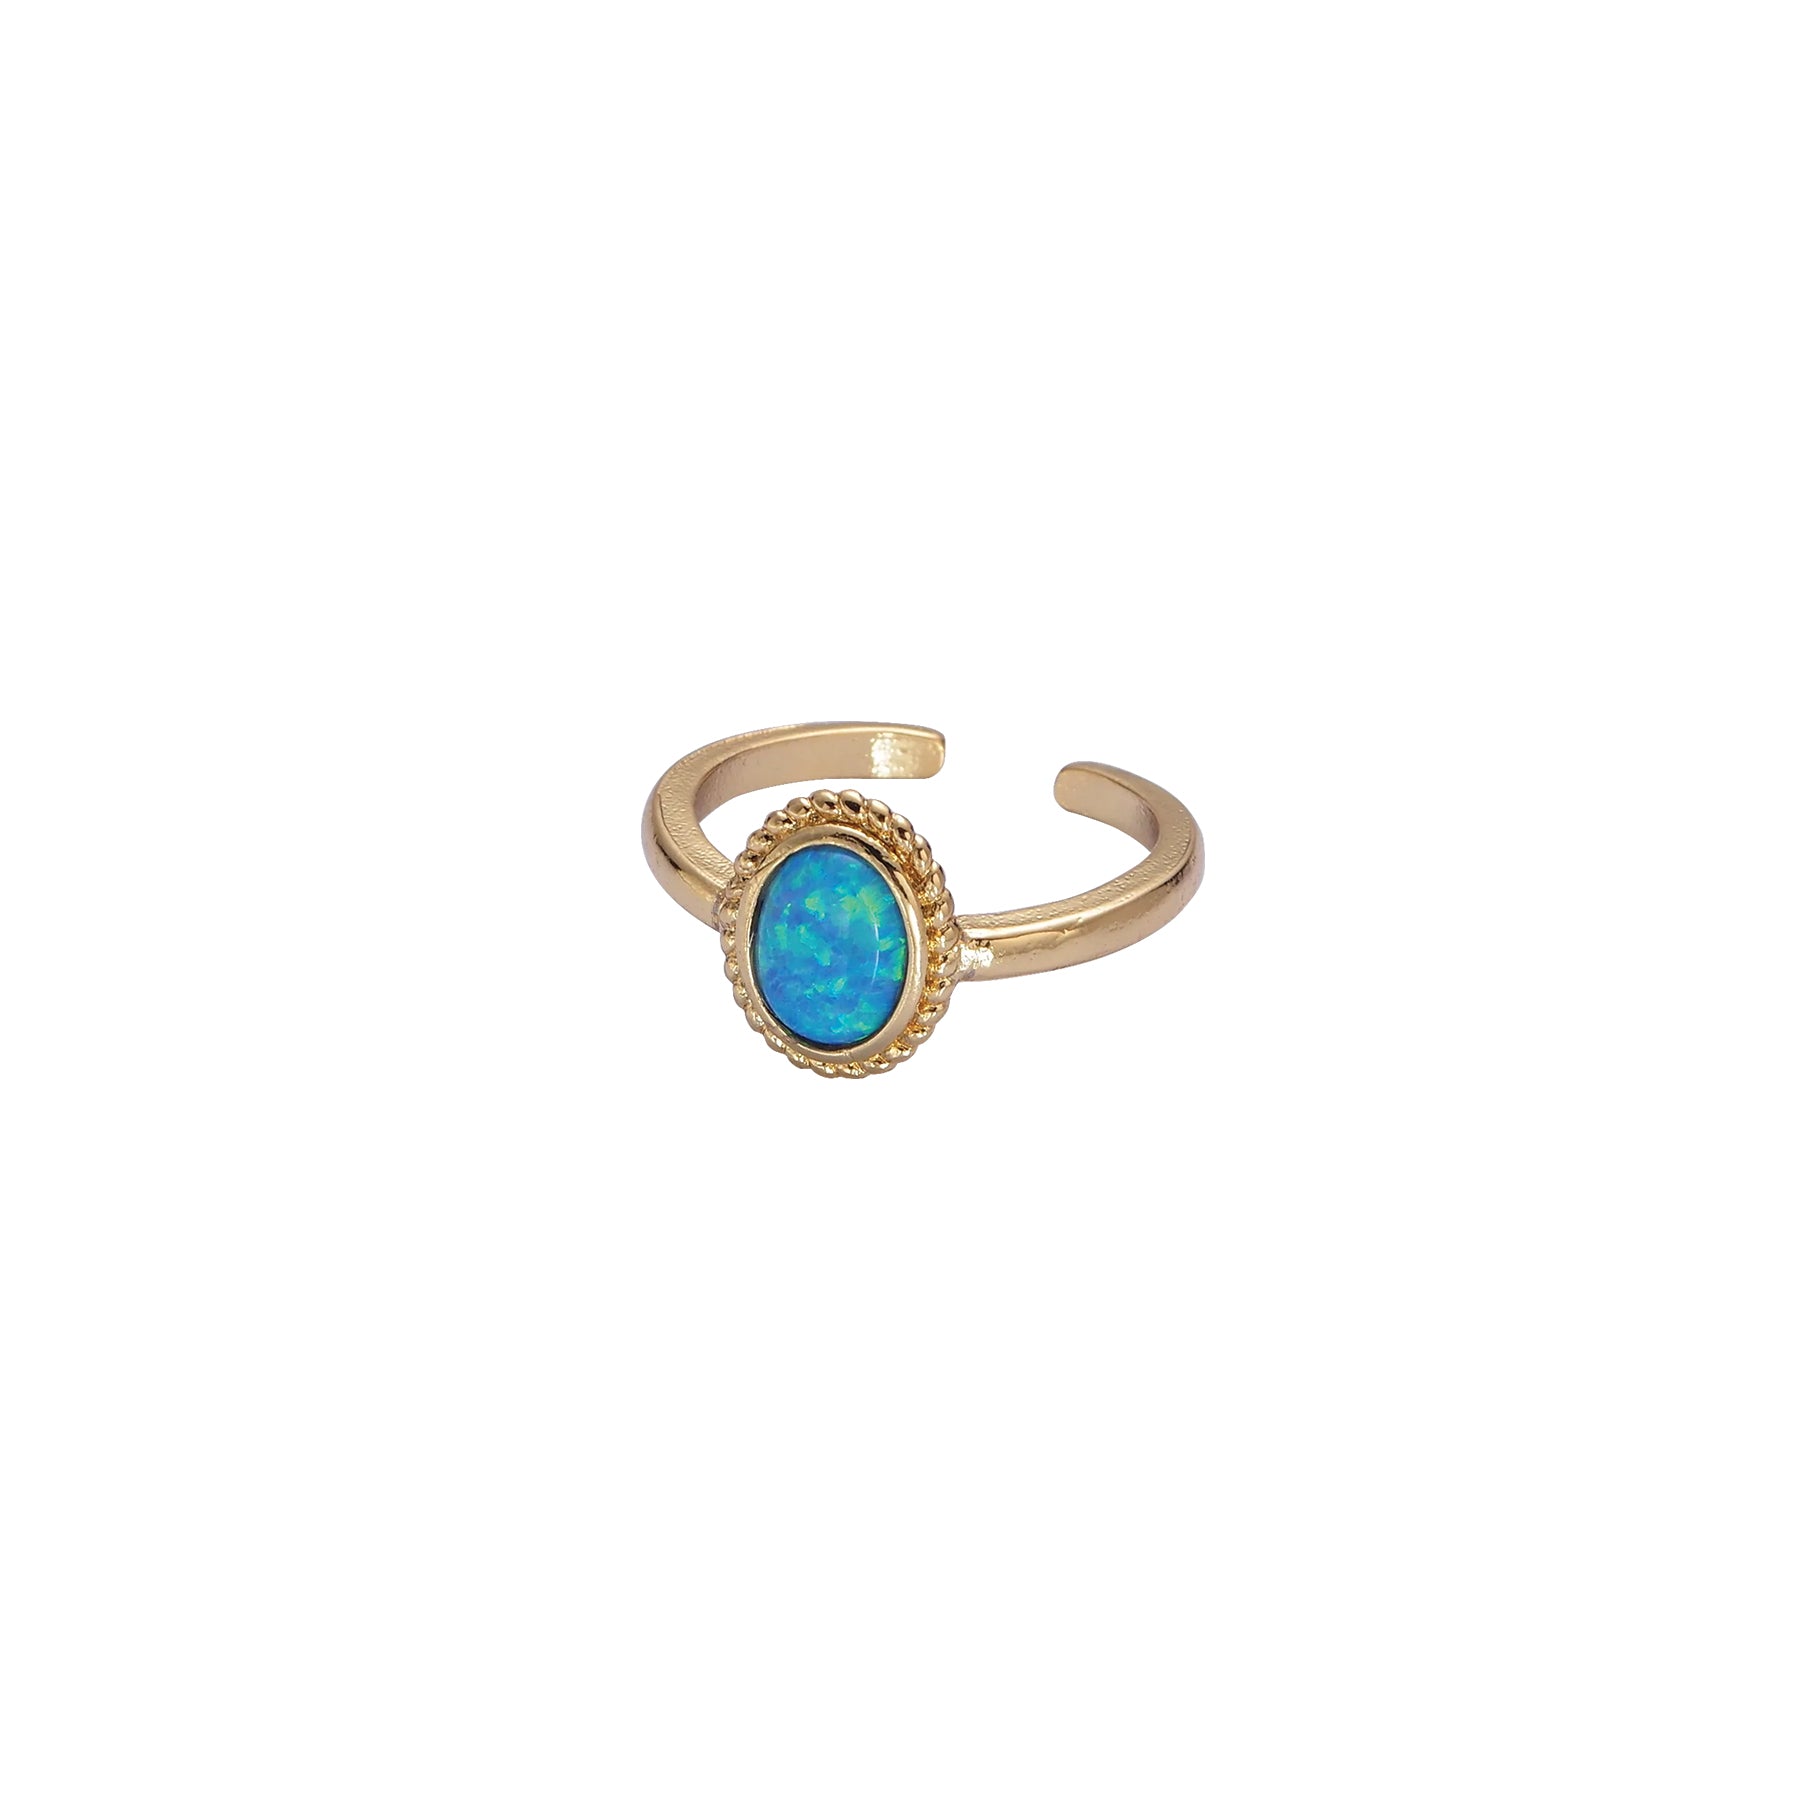 Gold and blue opal ring